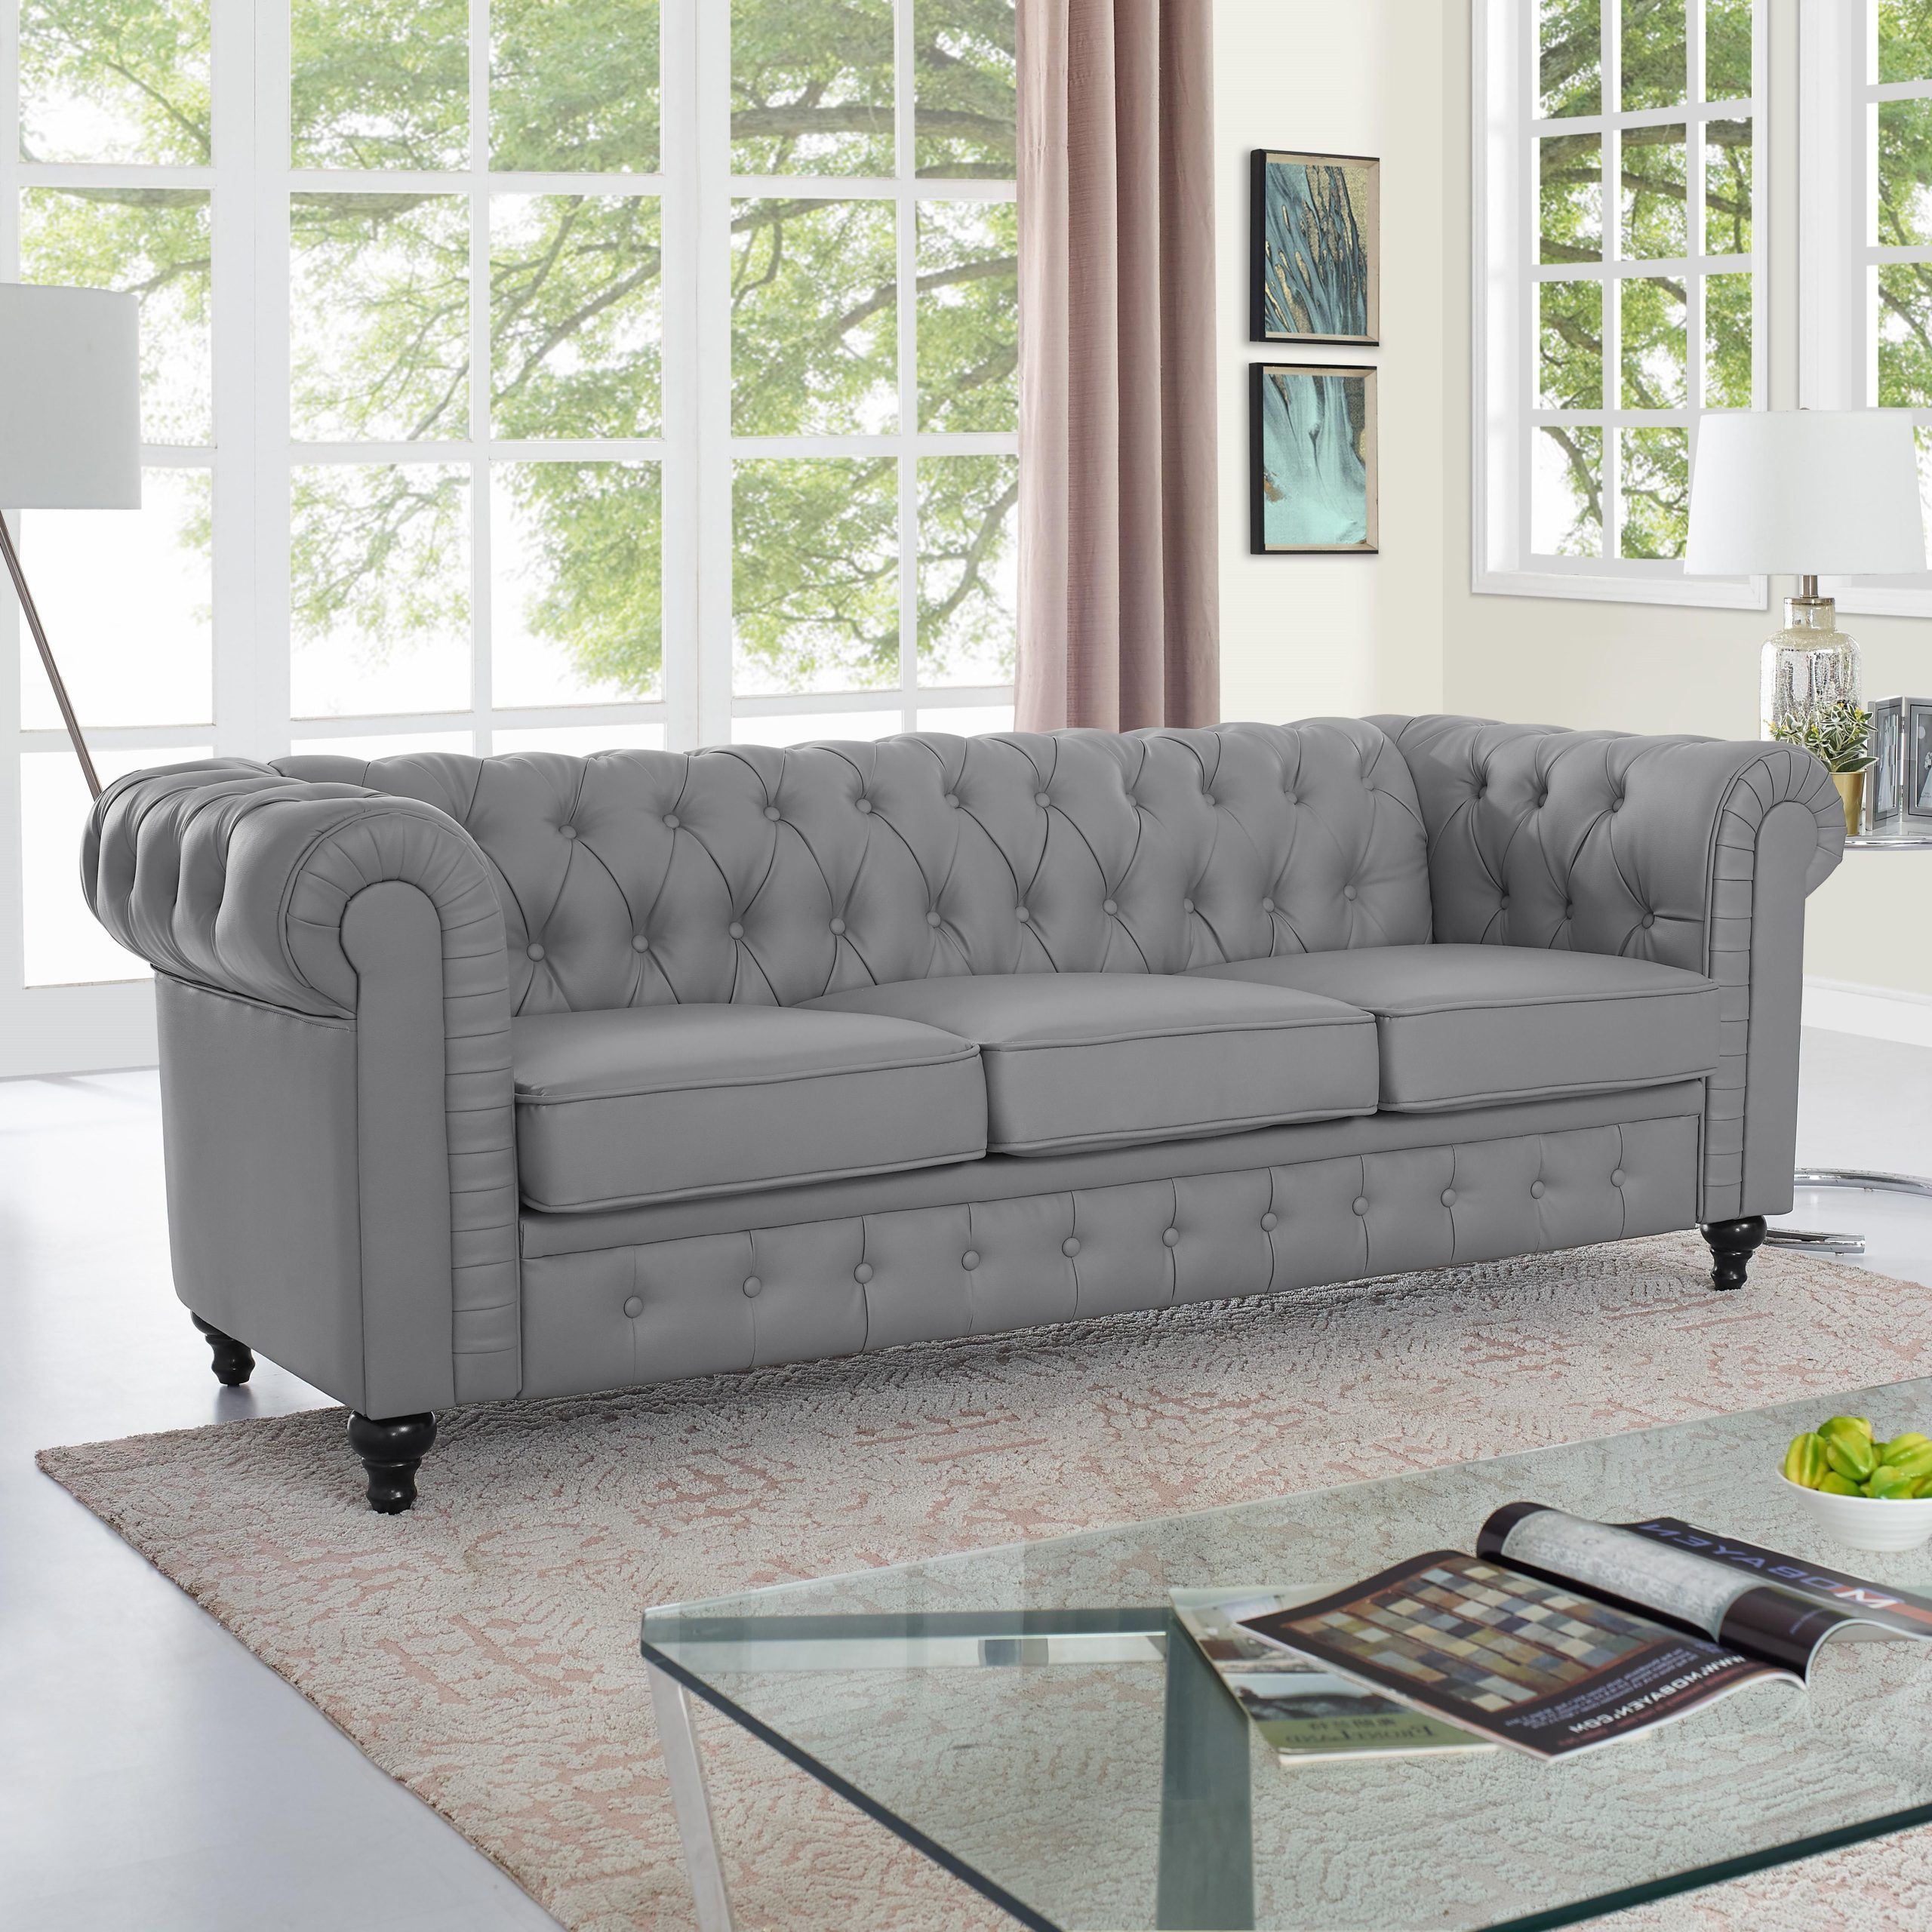 Emery Chesterfield Sofa With Rolled Arms, Tufted Cushionsnaomi Home In Chesterfield Sofas (Gallery 7 of 21)